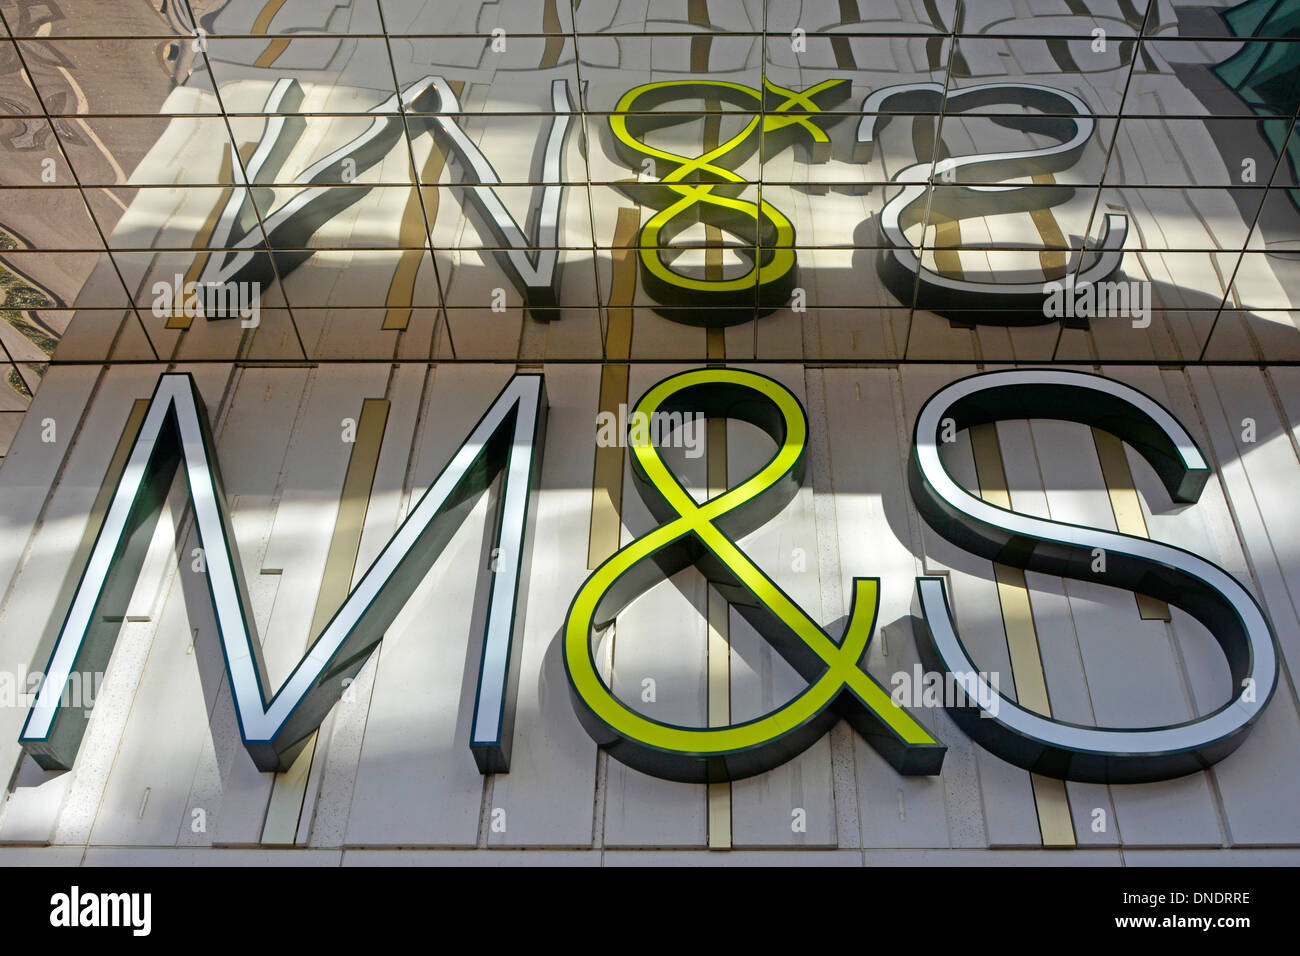 M&S store sign logo reflection in mirror tiles above Marks and Spencer shop at Westfield Stratford shopping centre Newham East London England UK Stock Photo